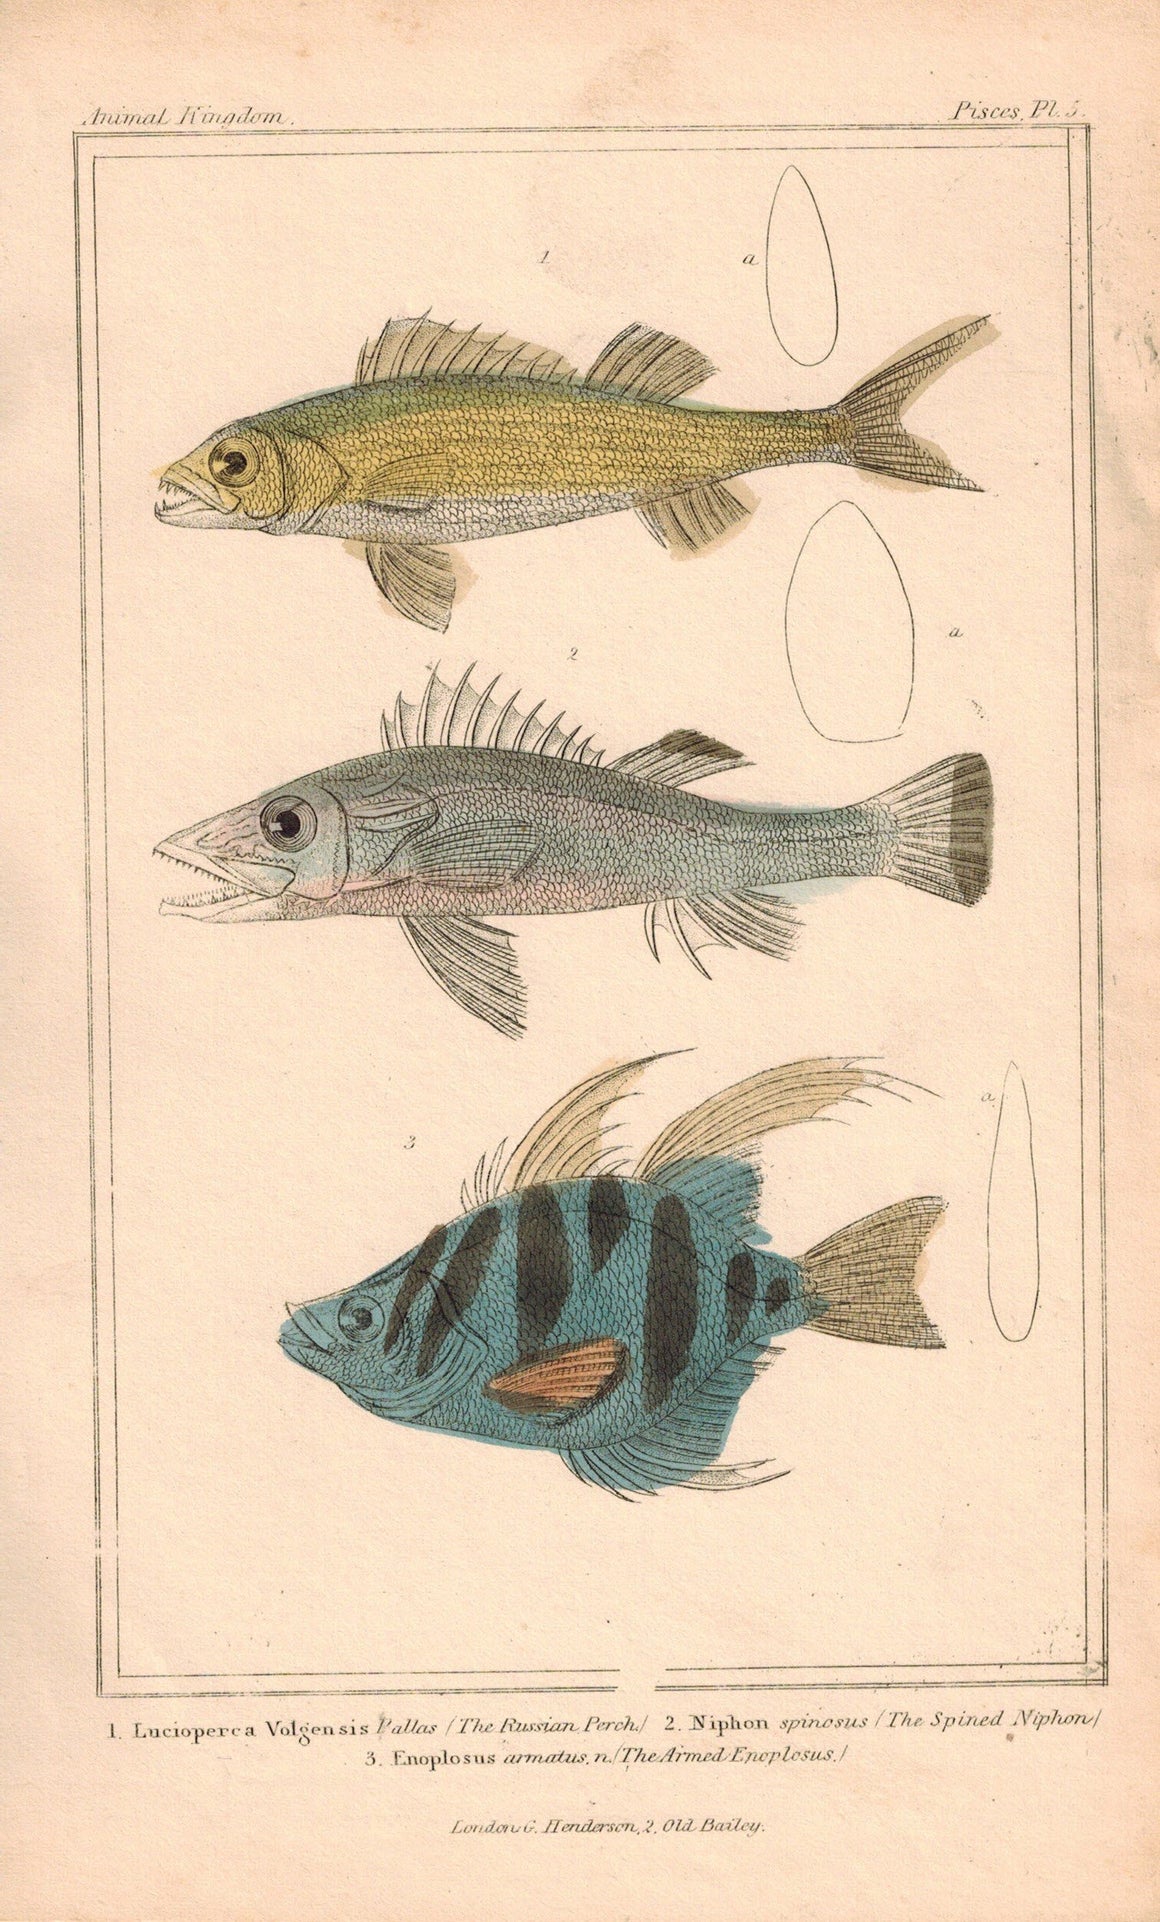  Russian Perch, Spined Niphon, Armed Enoplosus 1834 Engraved Cuvier Fish Print 5